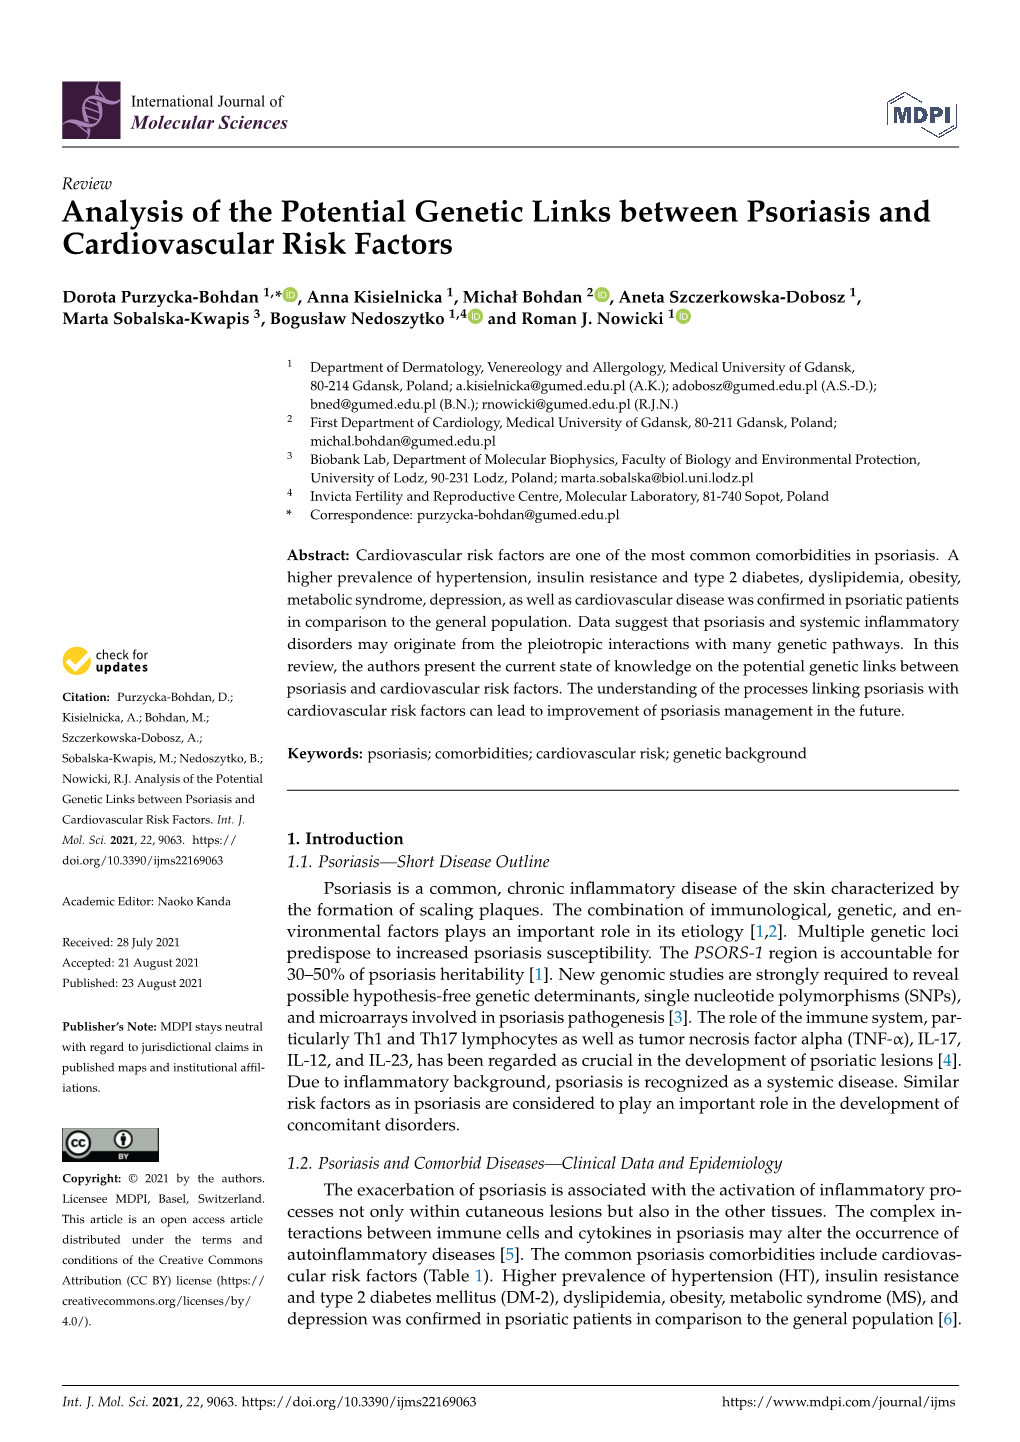 Analysis of the Potential Genetic Links Between Psoriasis and Cardiovascular Risk Factors